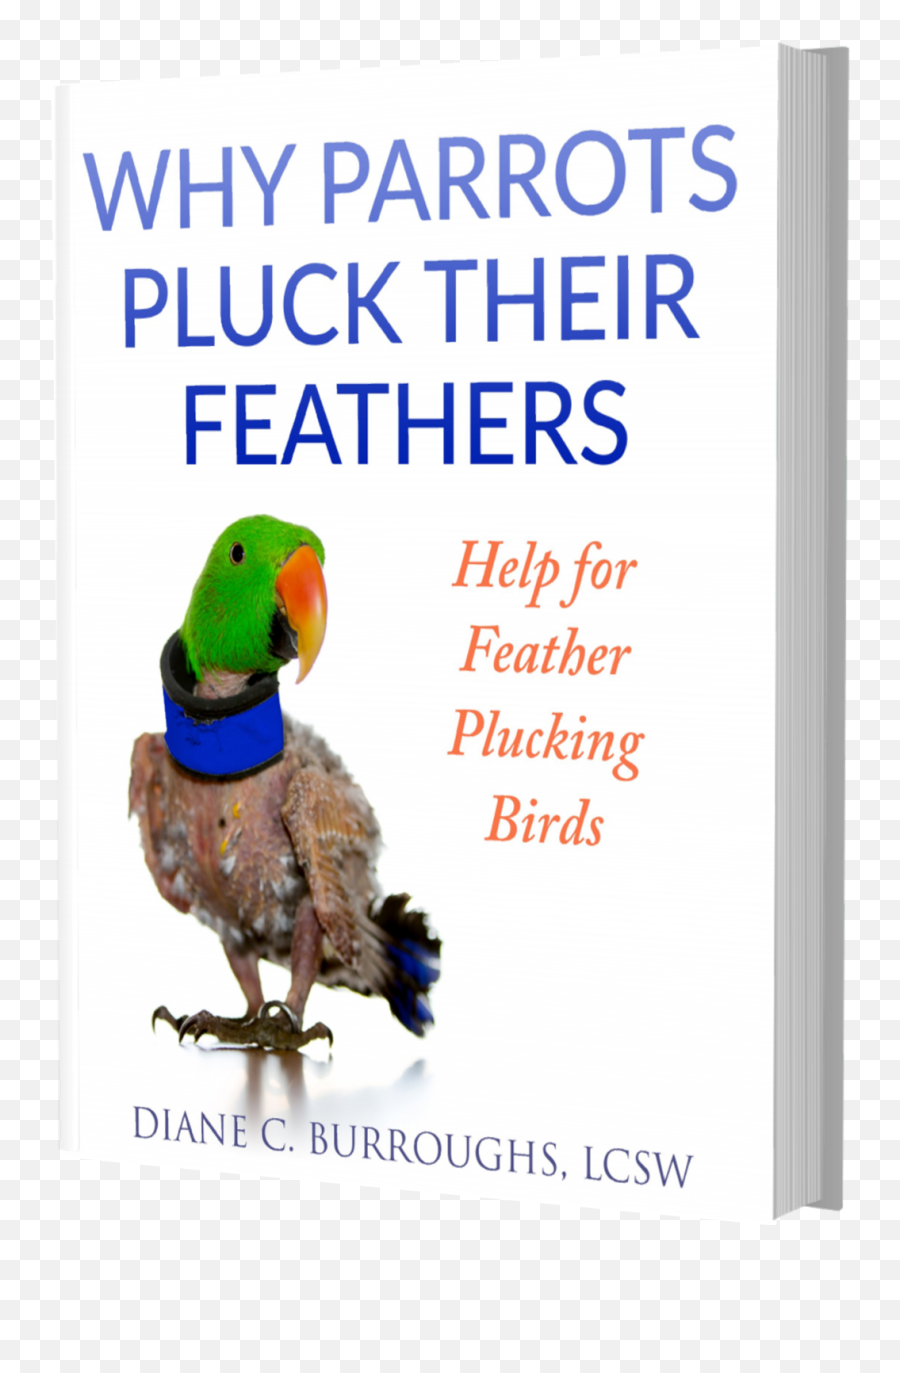 Best Bird Care Books The Feather Plucking Remedies For Emoji,Animal Emotion Model Sheet